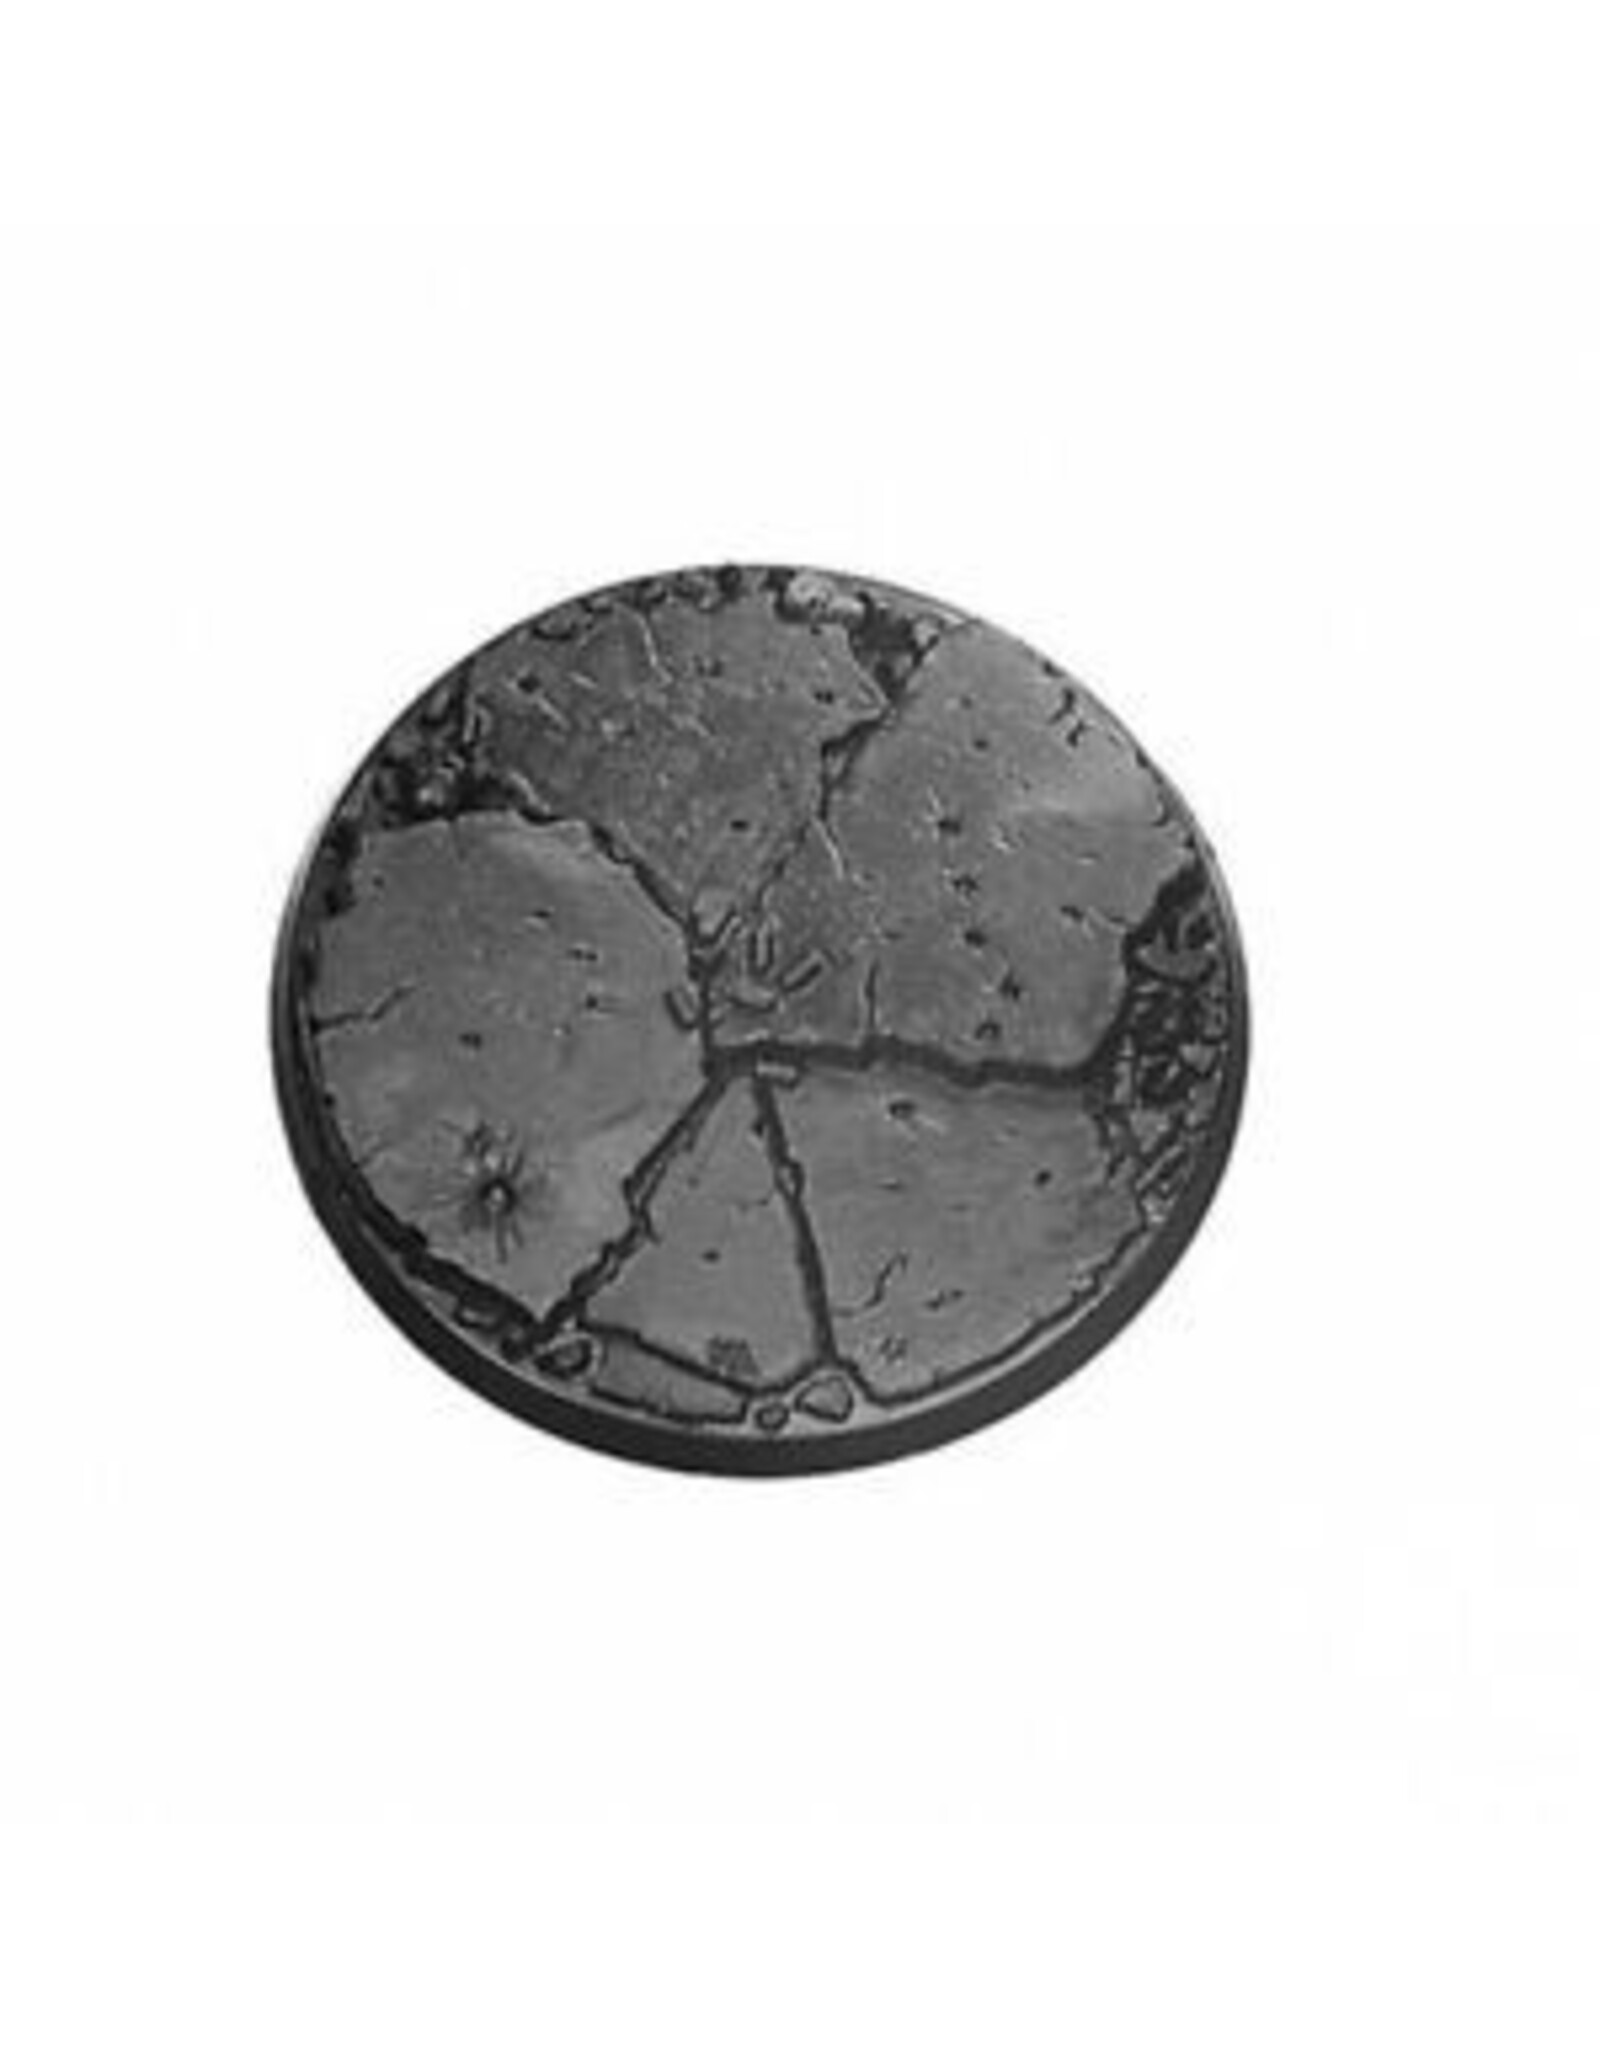 60mm Round Textured Bases (3)